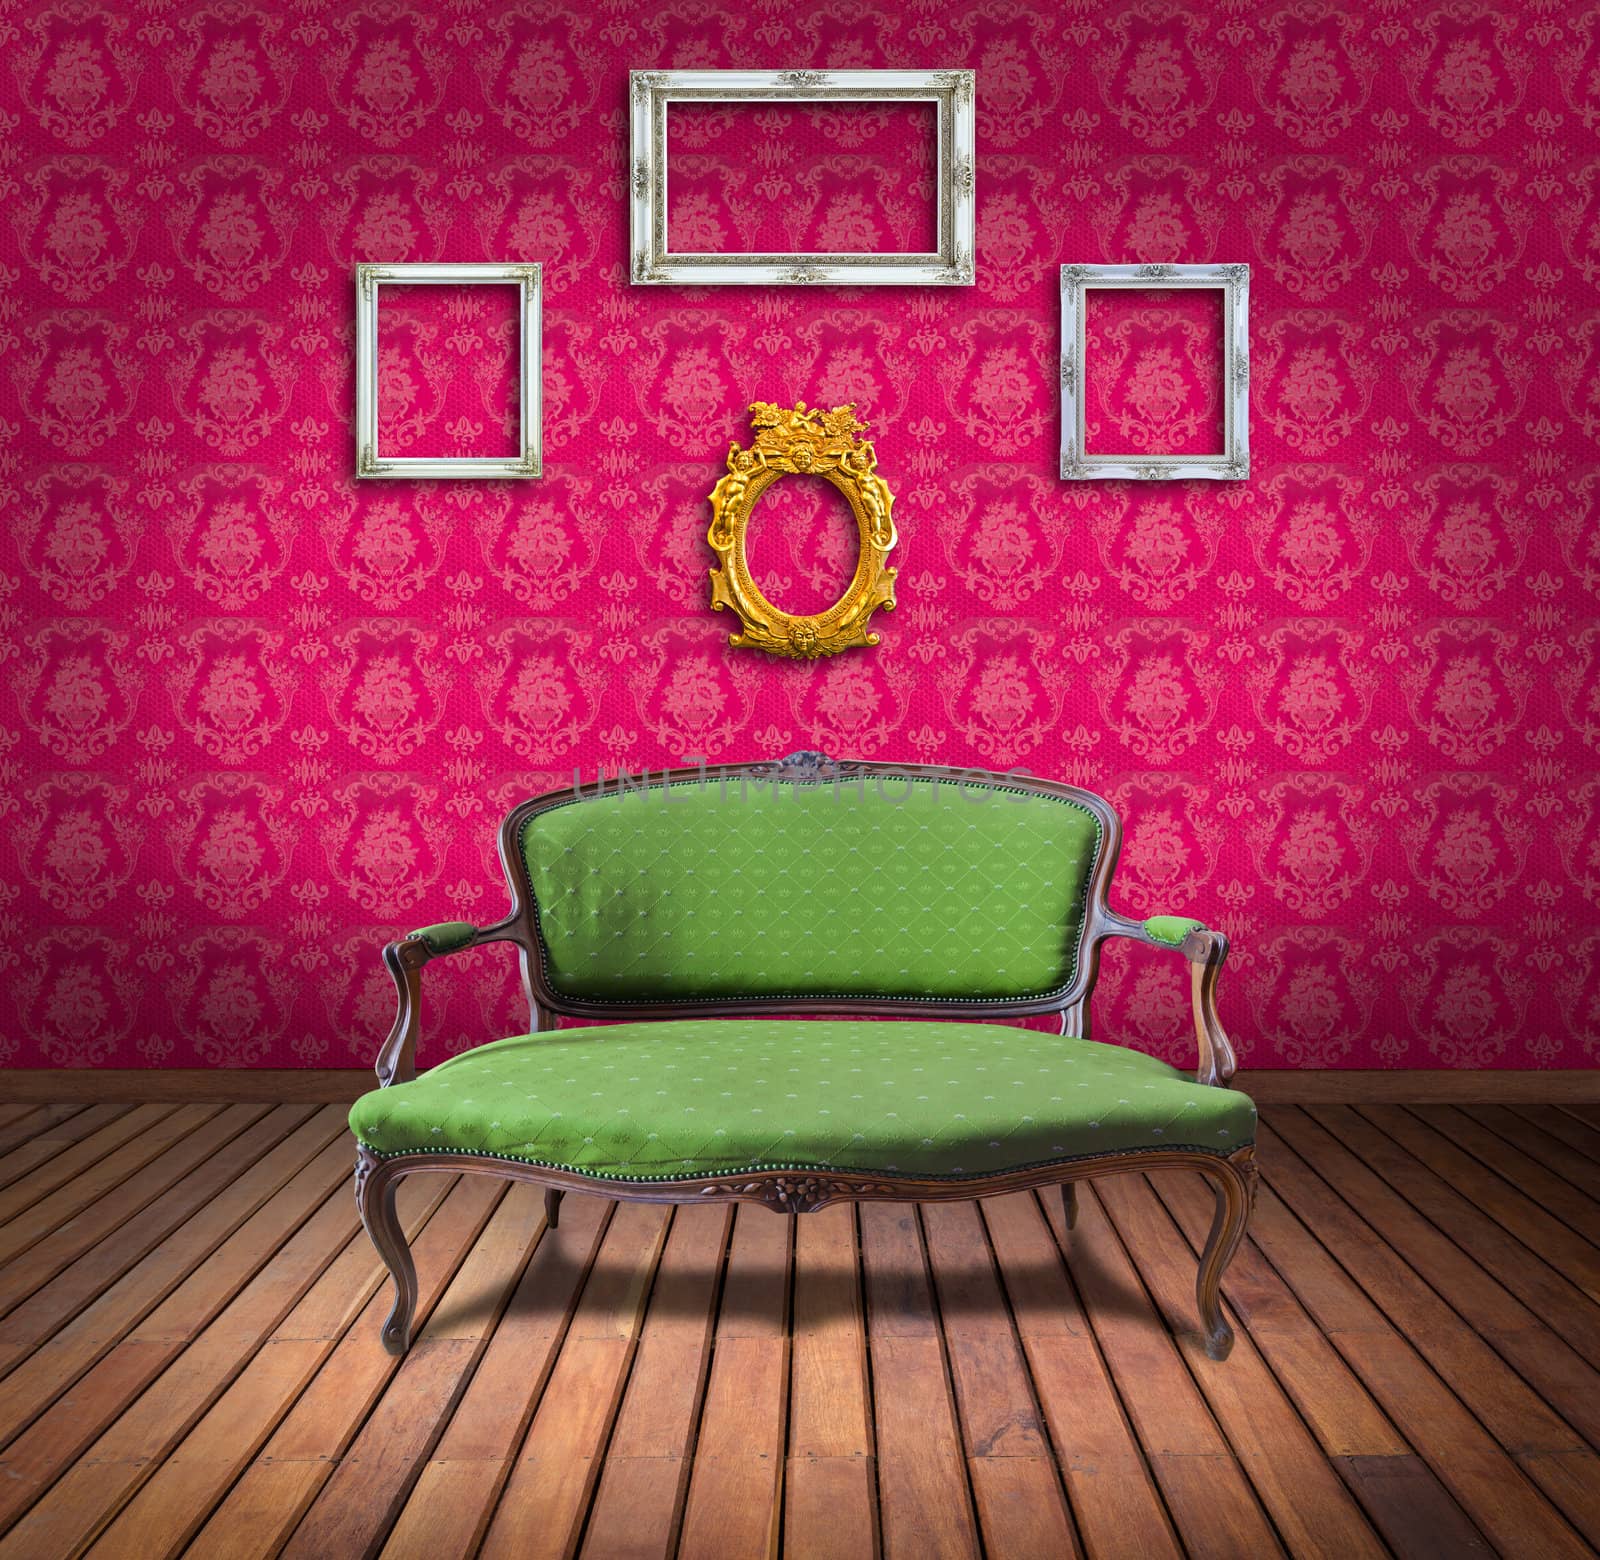 vintage luxury armchair and frame in pink wallpaper room by tungphoto